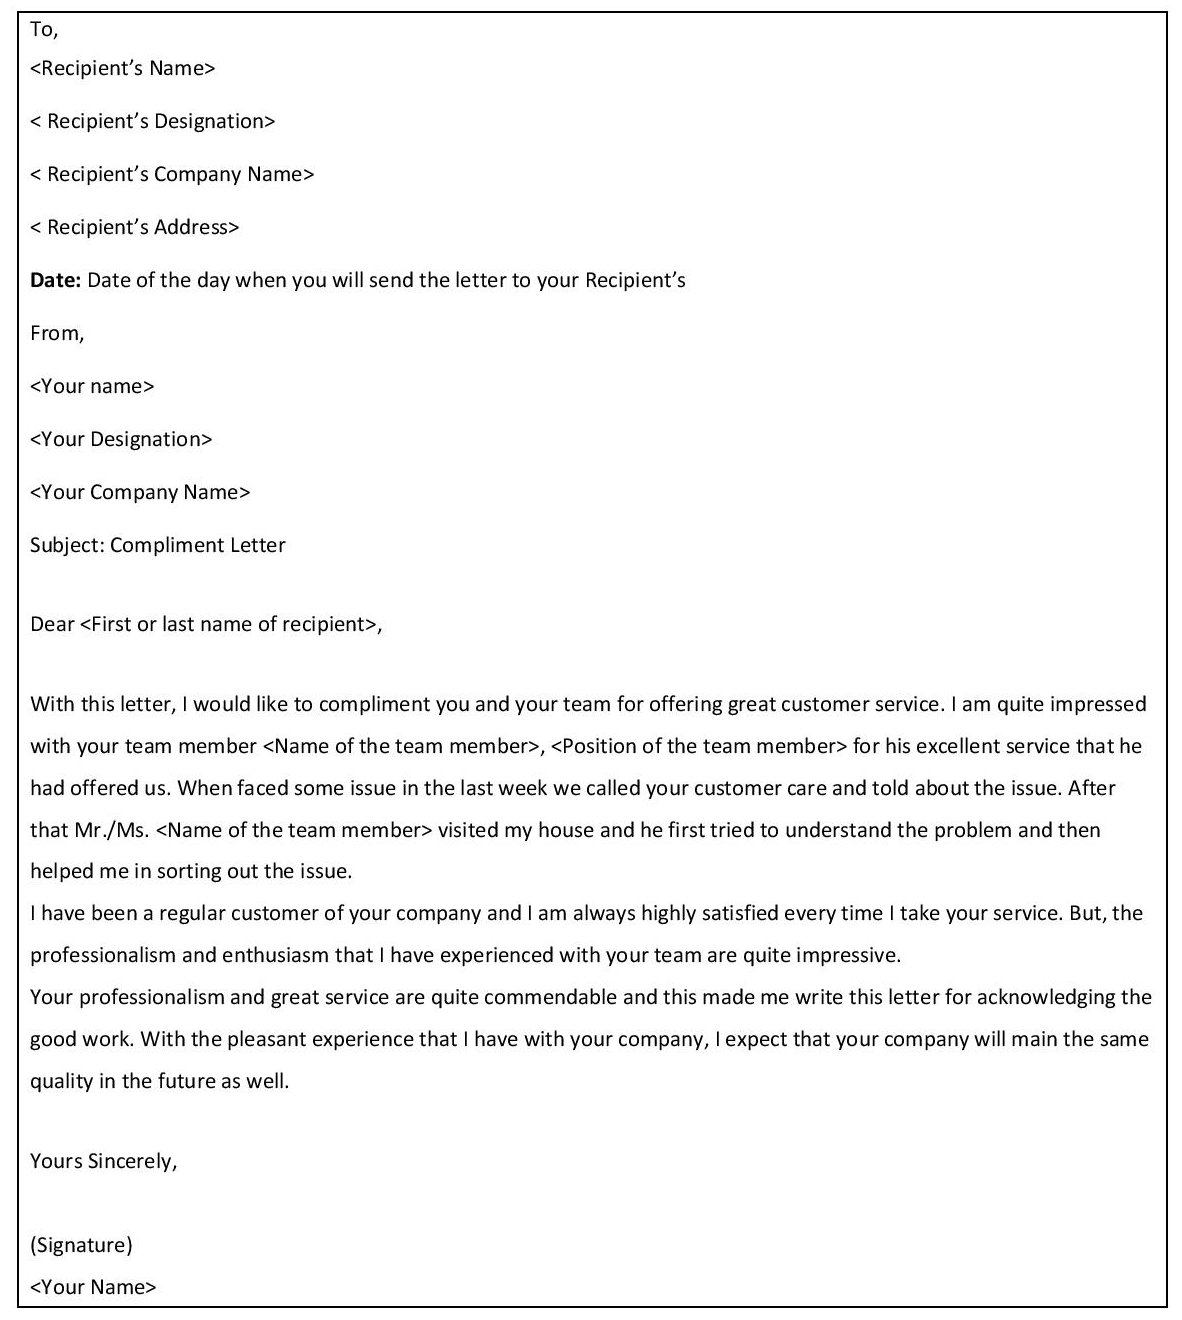 Compliment letter template